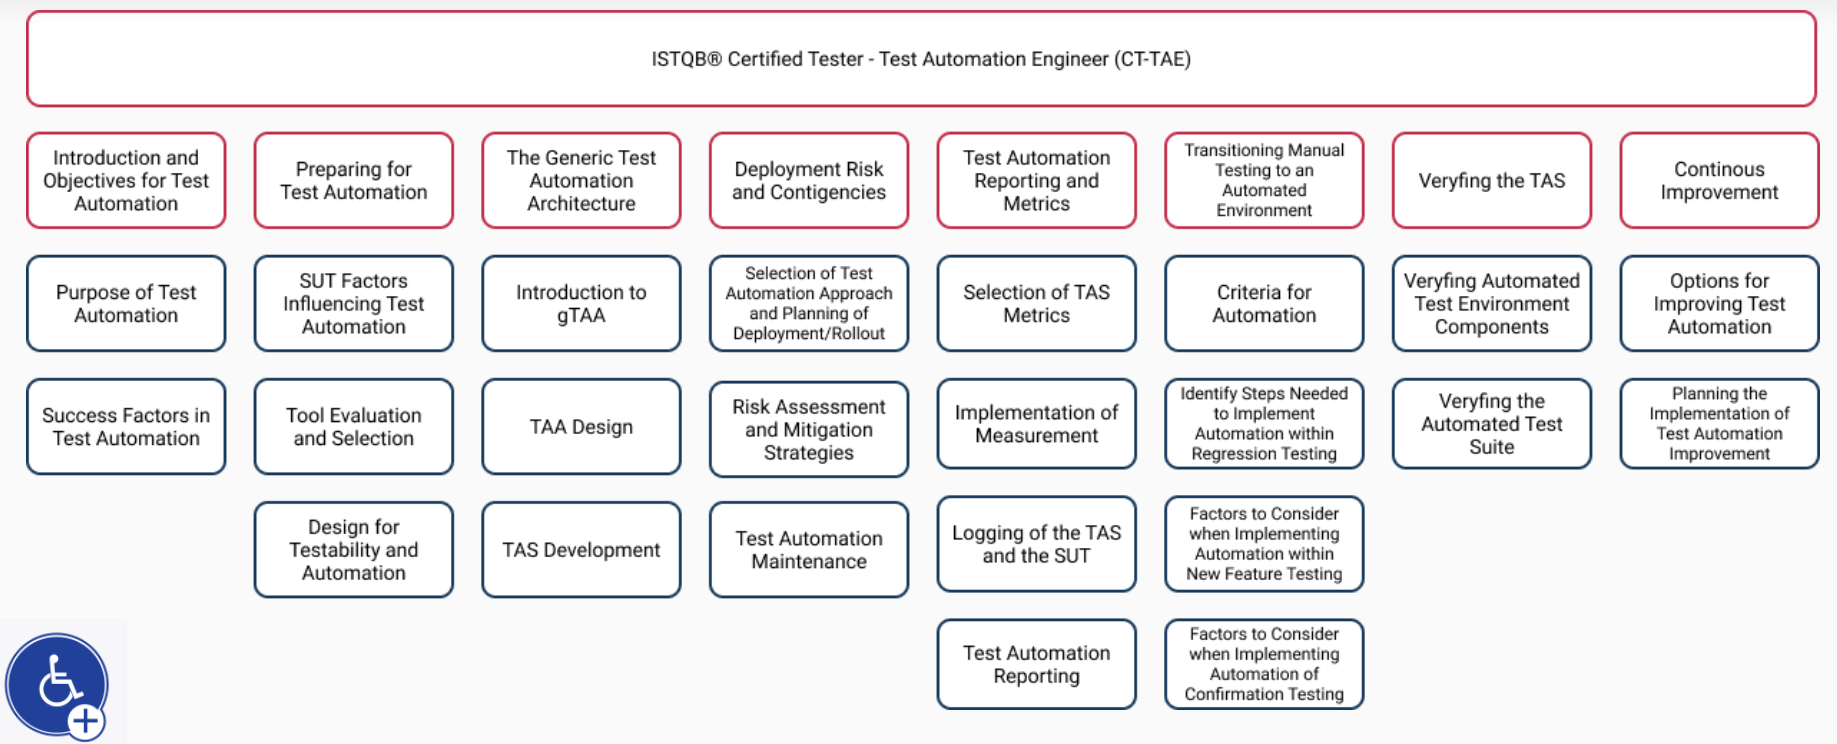 Contents of CT-TAE certification